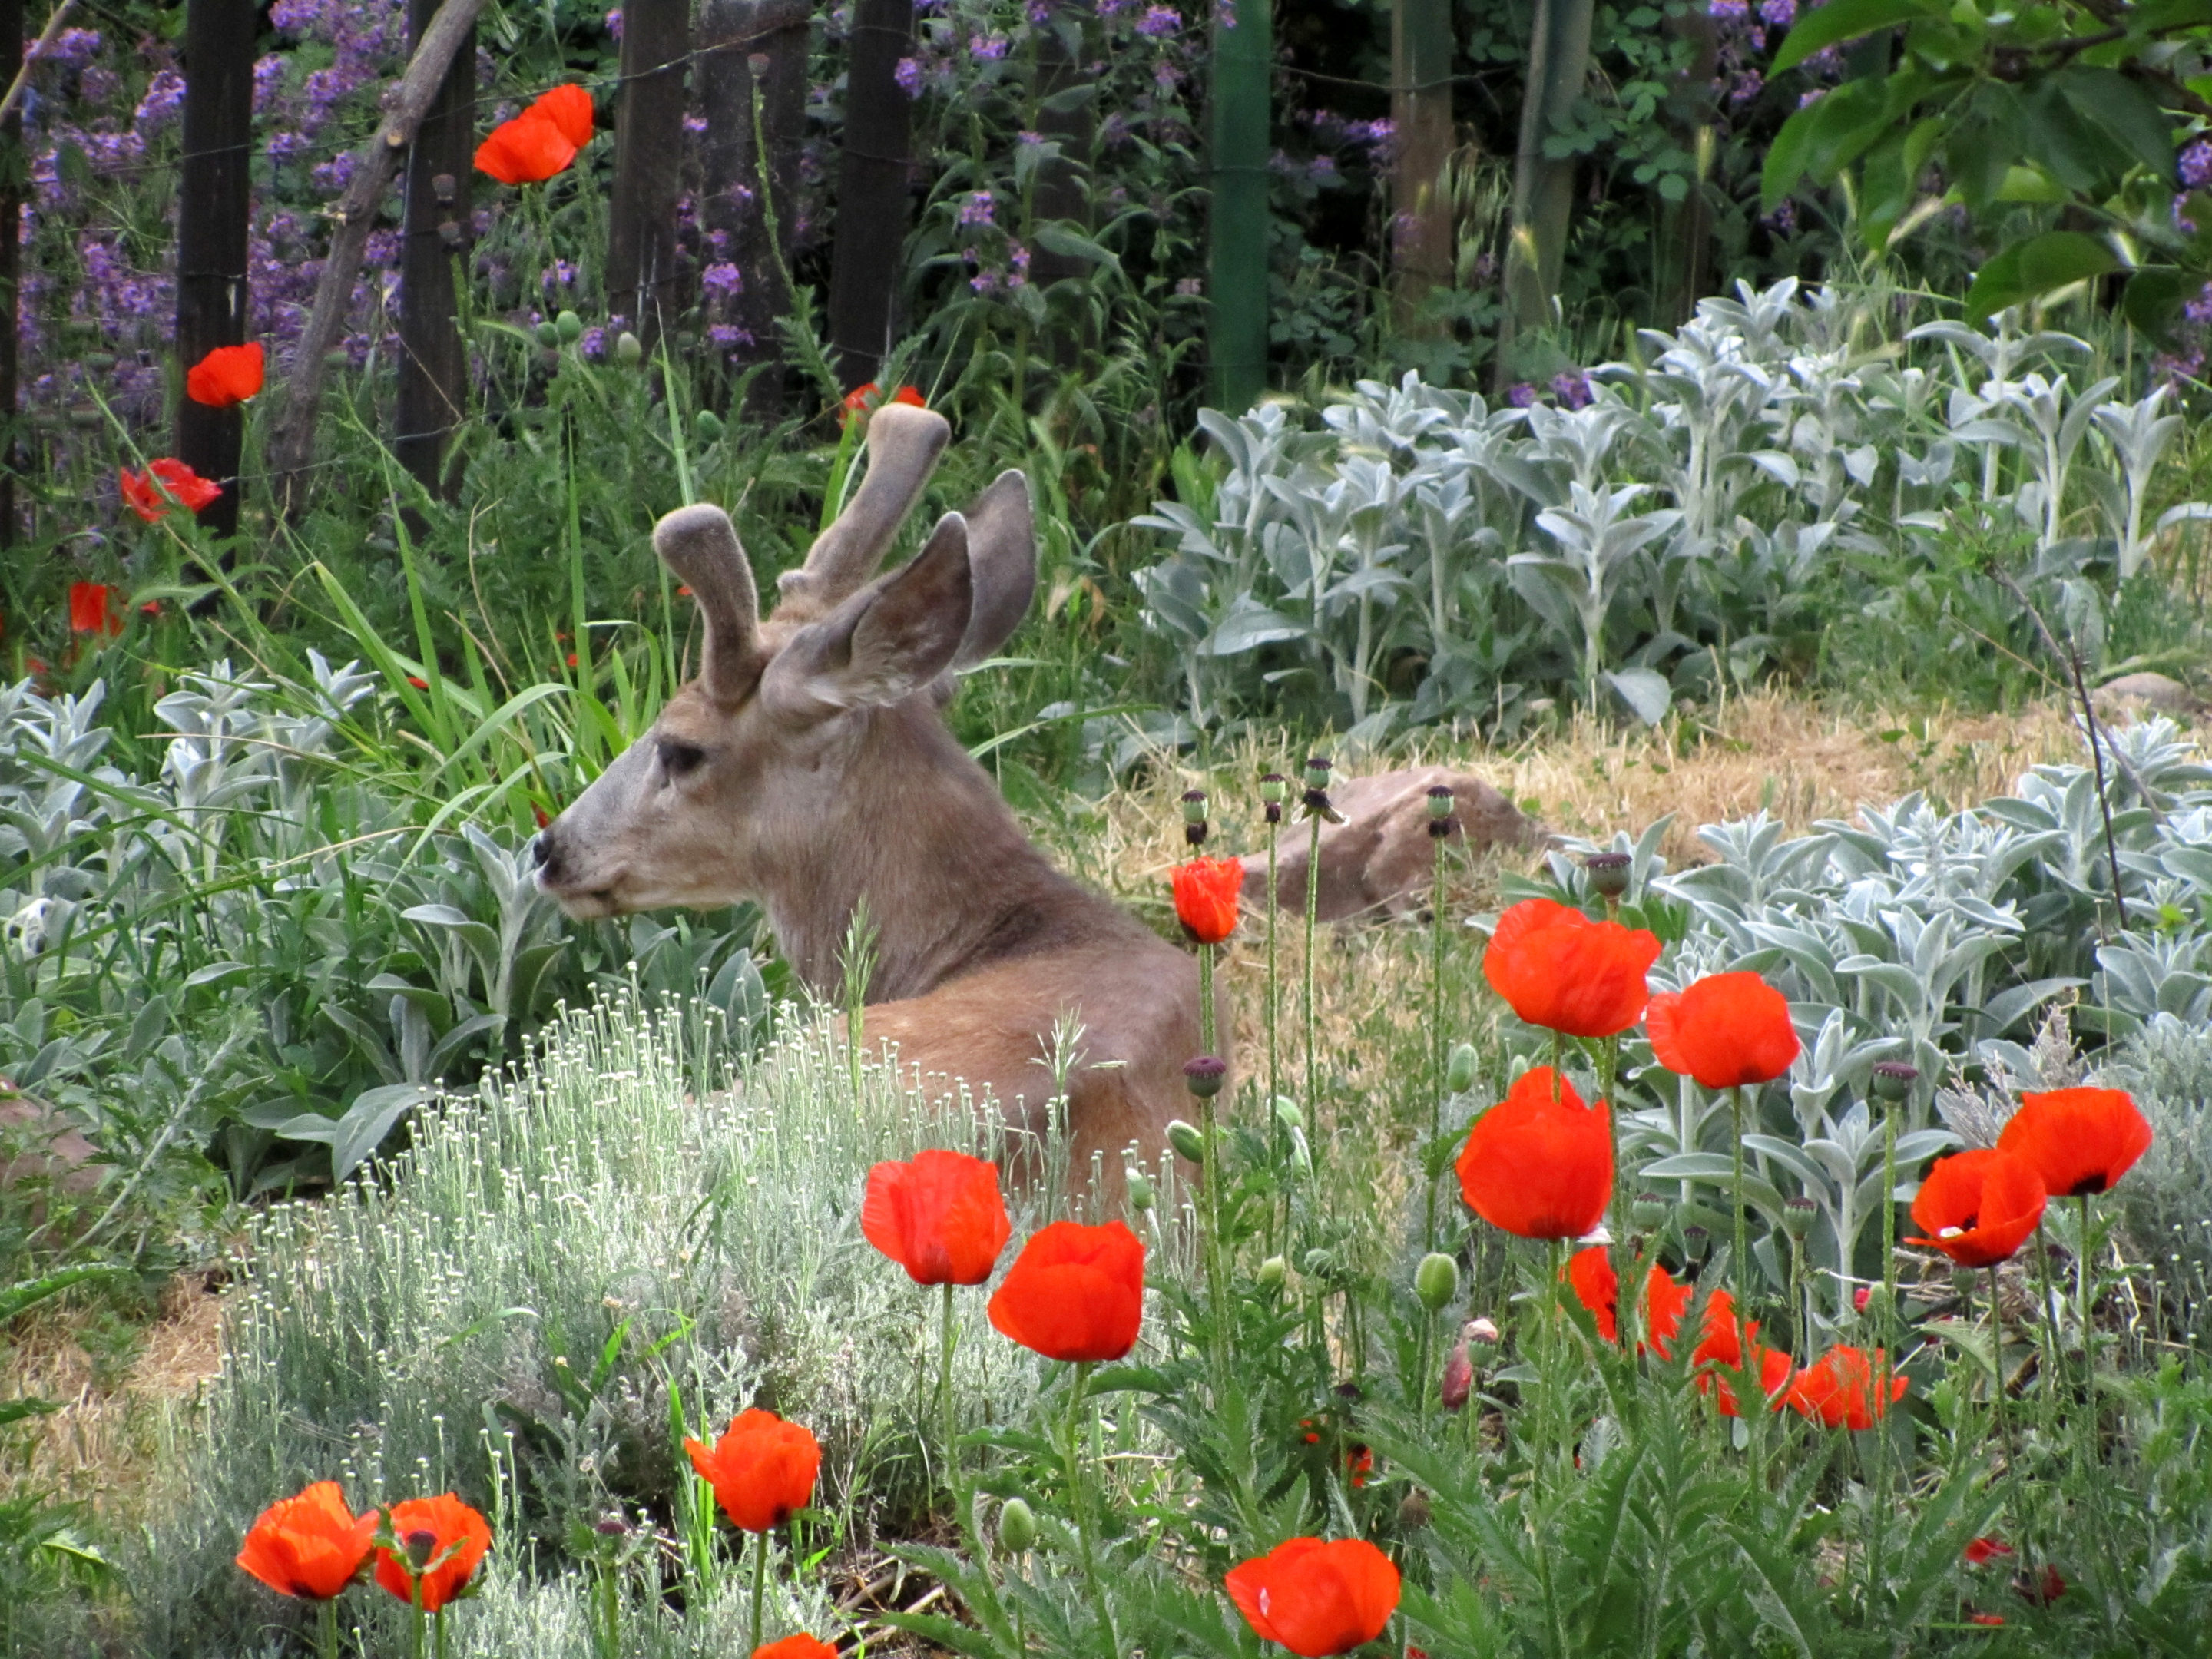 Deer and poppies in the Chautauqua gardens